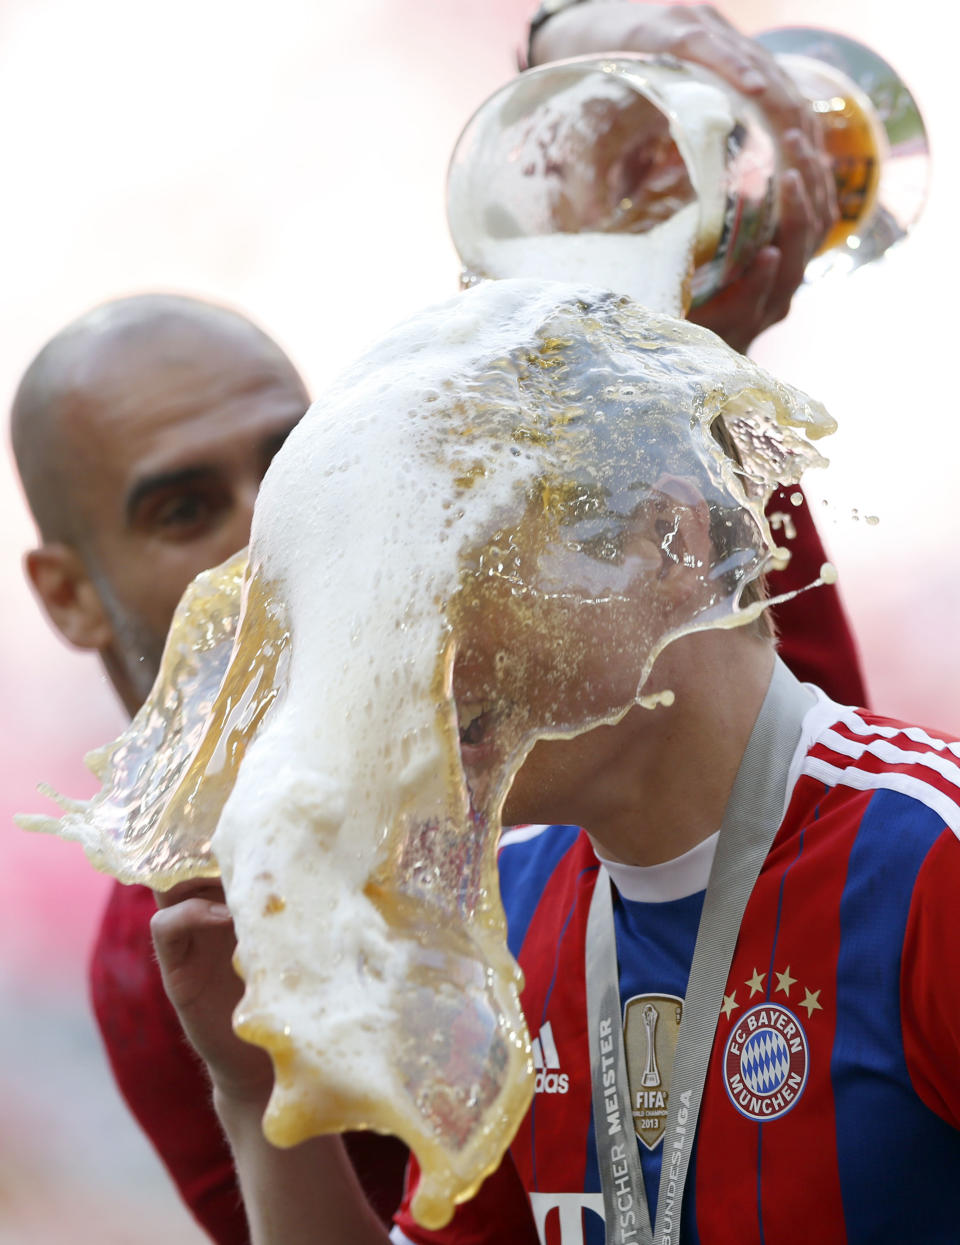 Bayern head coach Pep Guardiola of Spain showers player Toni Kroos with beer after winning the German Soccer Championships after the season's last match between FC Bayern Munich and VfB Stuttgart, in Munich, southern Germany, Saturday, May 10, 2014. (AP Photo/Matthias Schrader)